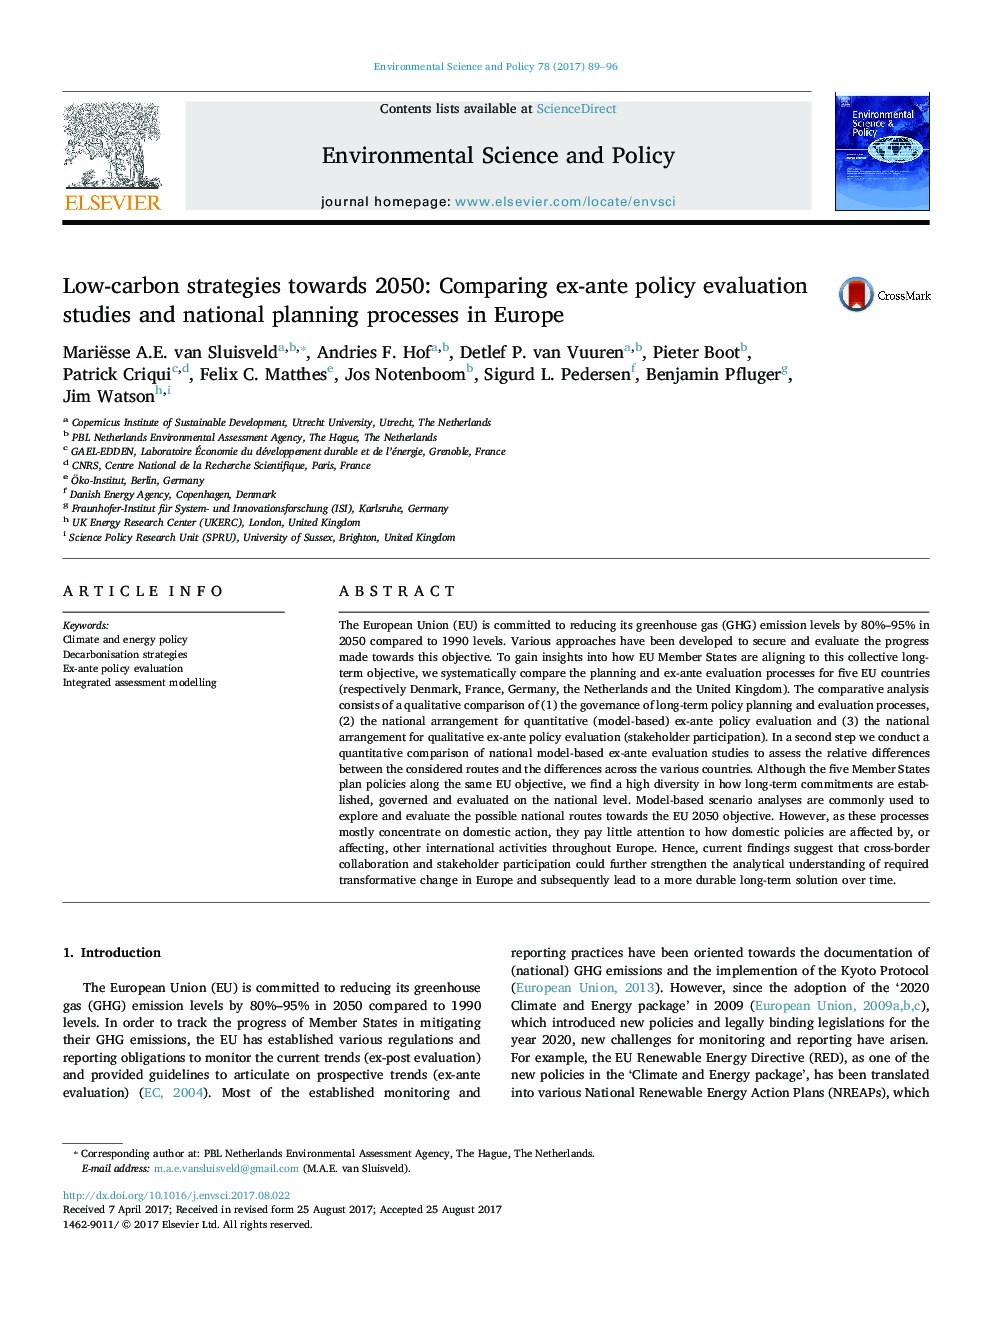 Low-carbon strategies towards 2050: Comparing ex-ante policy evaluation studies and national planning processes in Europe